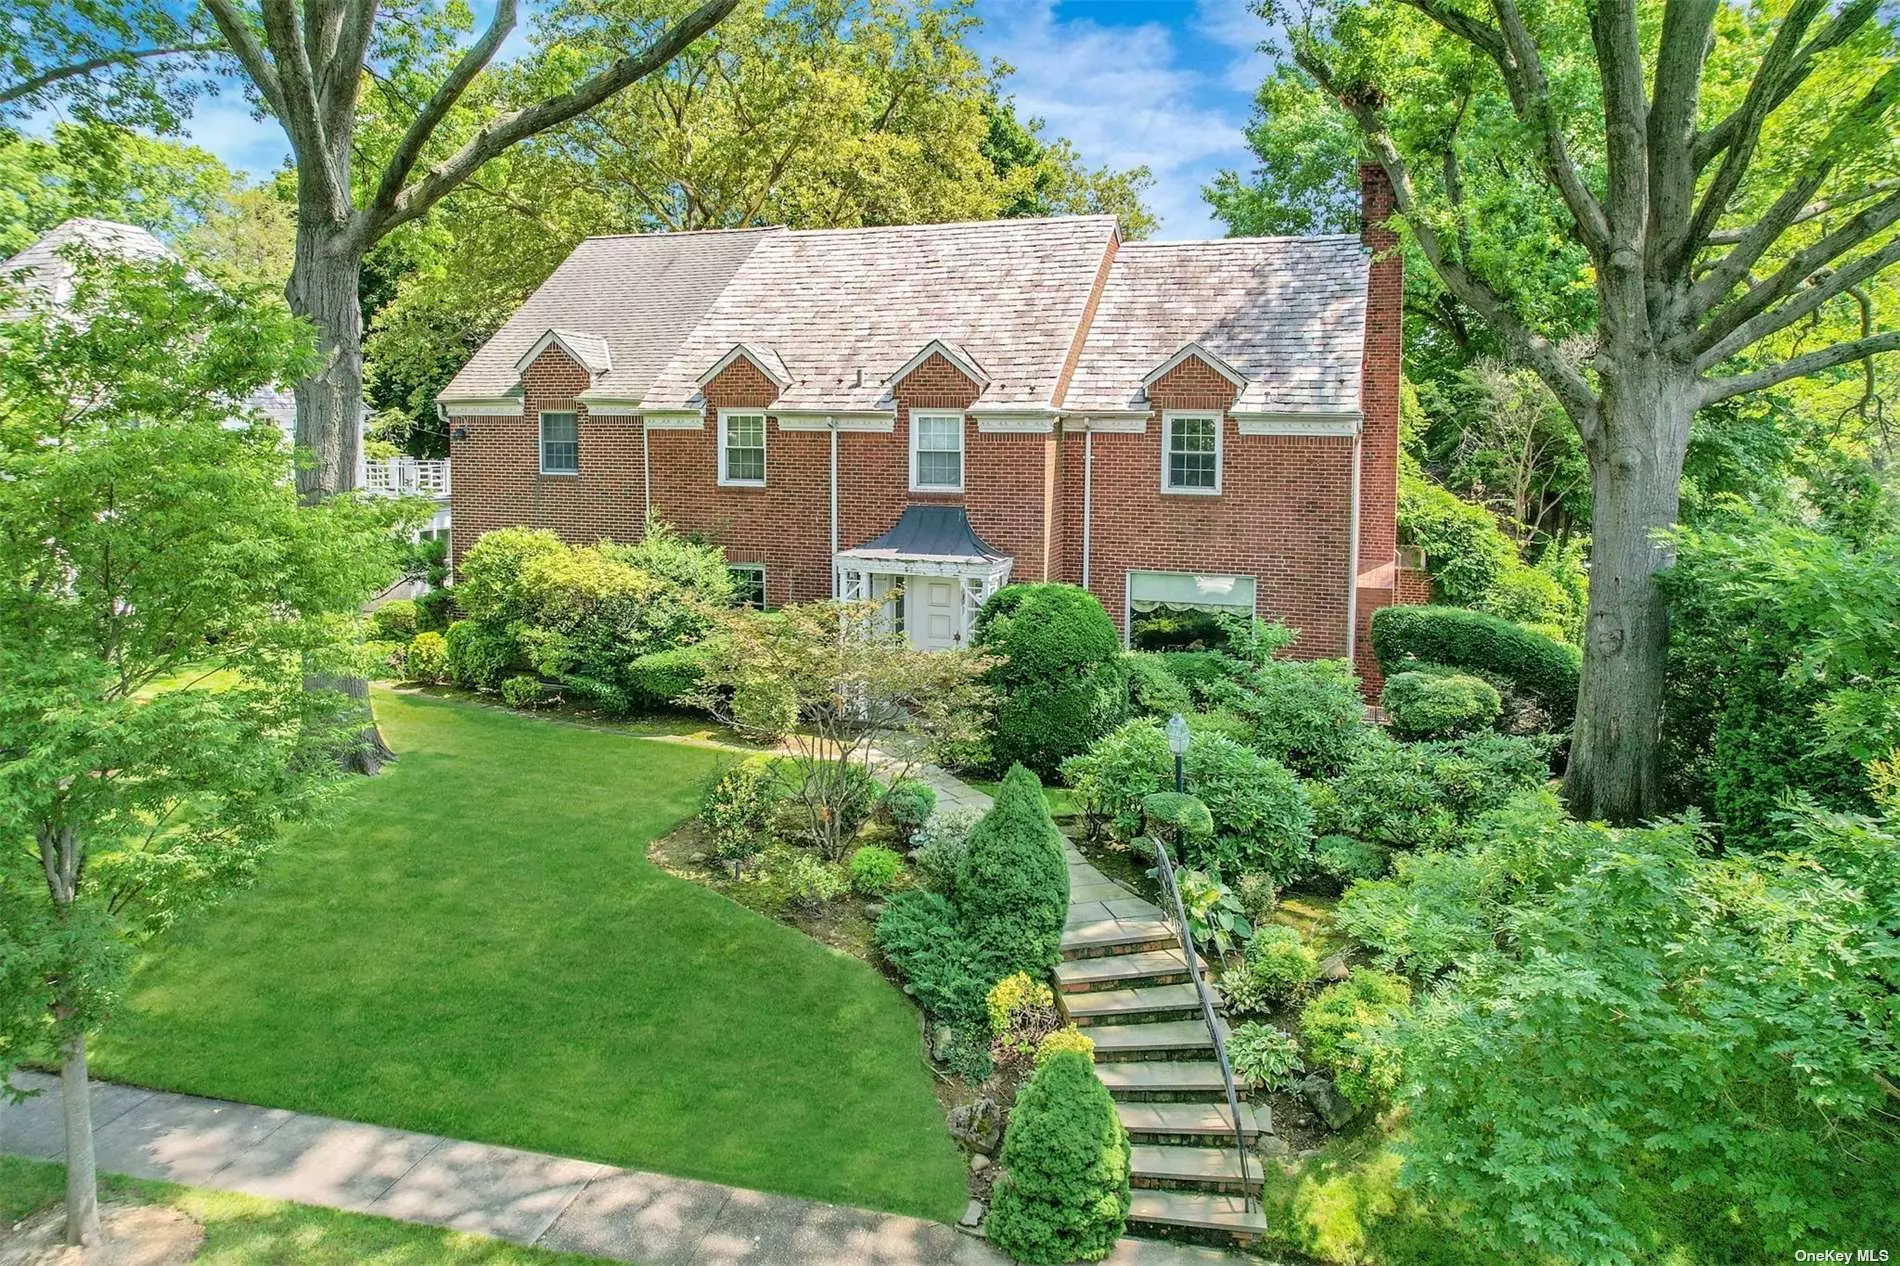 Exquisite center hall brick colonial on a prime block of Jamaica Estates, situated on a combined lot of 101x150, totaling 15, 161 square feet. As you step inside, you are greeted by a warm and inviting living room featuring a marble fireplace. The stunning family room with cathedral ceilings and skylights offers abundant natural light. The remarkable kitchen boasts top-of-the-line appliances, two sinks, two dishwashers, two ovens, a large island, granite countertops, and an adjacent office. A large formal dining, overlooking the magnificent scenery, adds elegance for formal occasions. On the first floor, there is also a guest bedroom and a full bathroom.       The second floor features a primary suite, with a full marble bathroom and a loft. There are four additional bedrooms with two full bathrooms, one ensuite. The full basement includes a spacious family room, full bathroom, maids quarters, large laundry room, and a 2-car attached garage. However, it is the backyard that truly captivates the senses. With access from both the kitchen and the family room, step outside into a haven of tranquility and beauty. The magnificent, professionally landscaped grounds are a true masterpiece, offering a serene retreat for outdoor enjoyment.